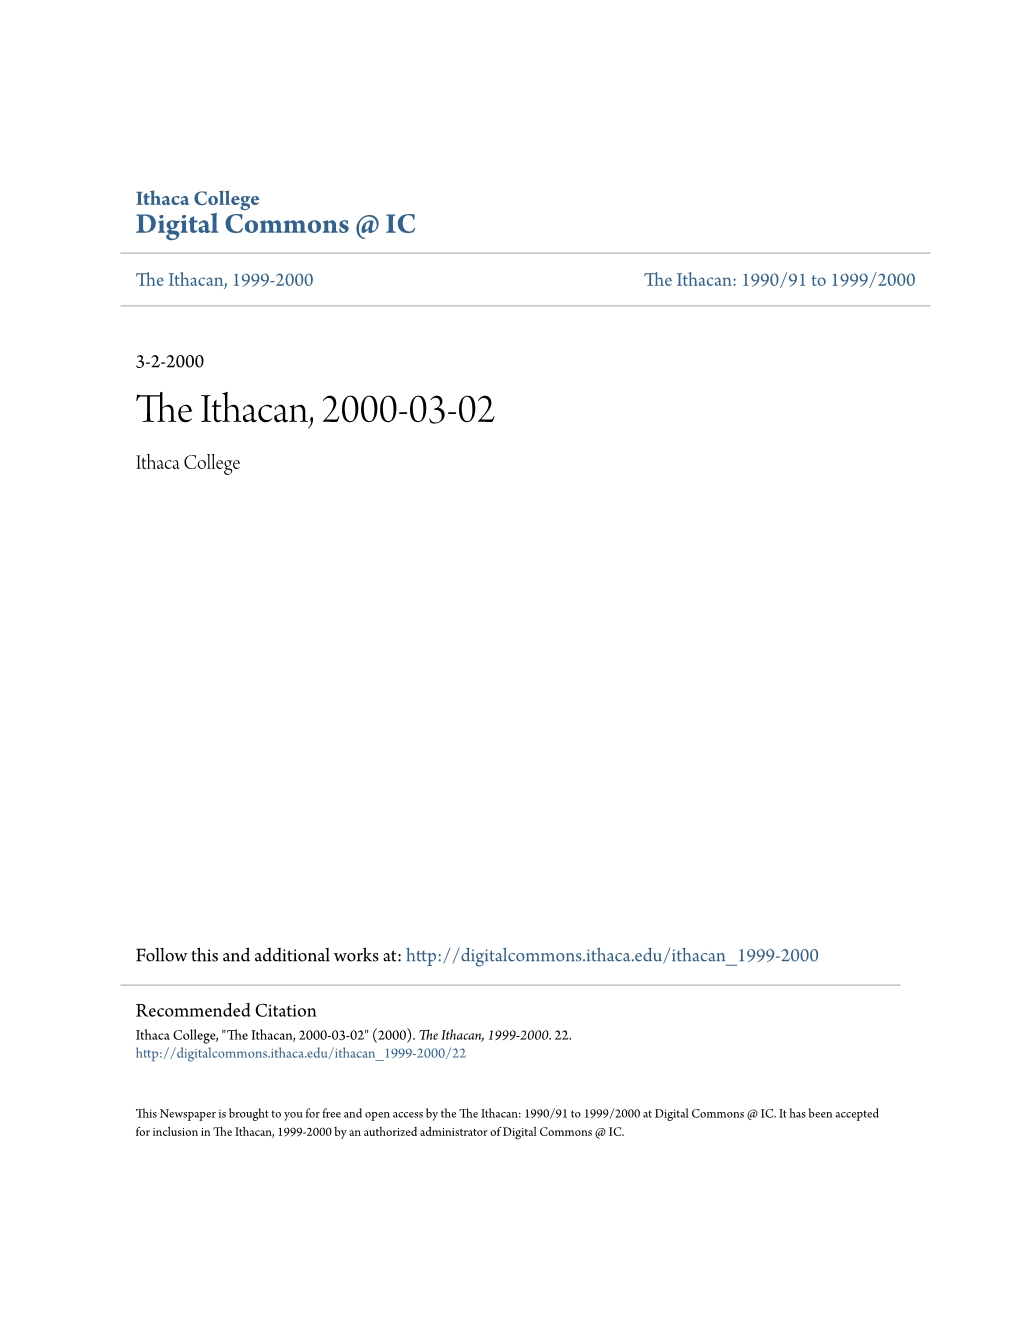 The Ithacan, 2000-03-02